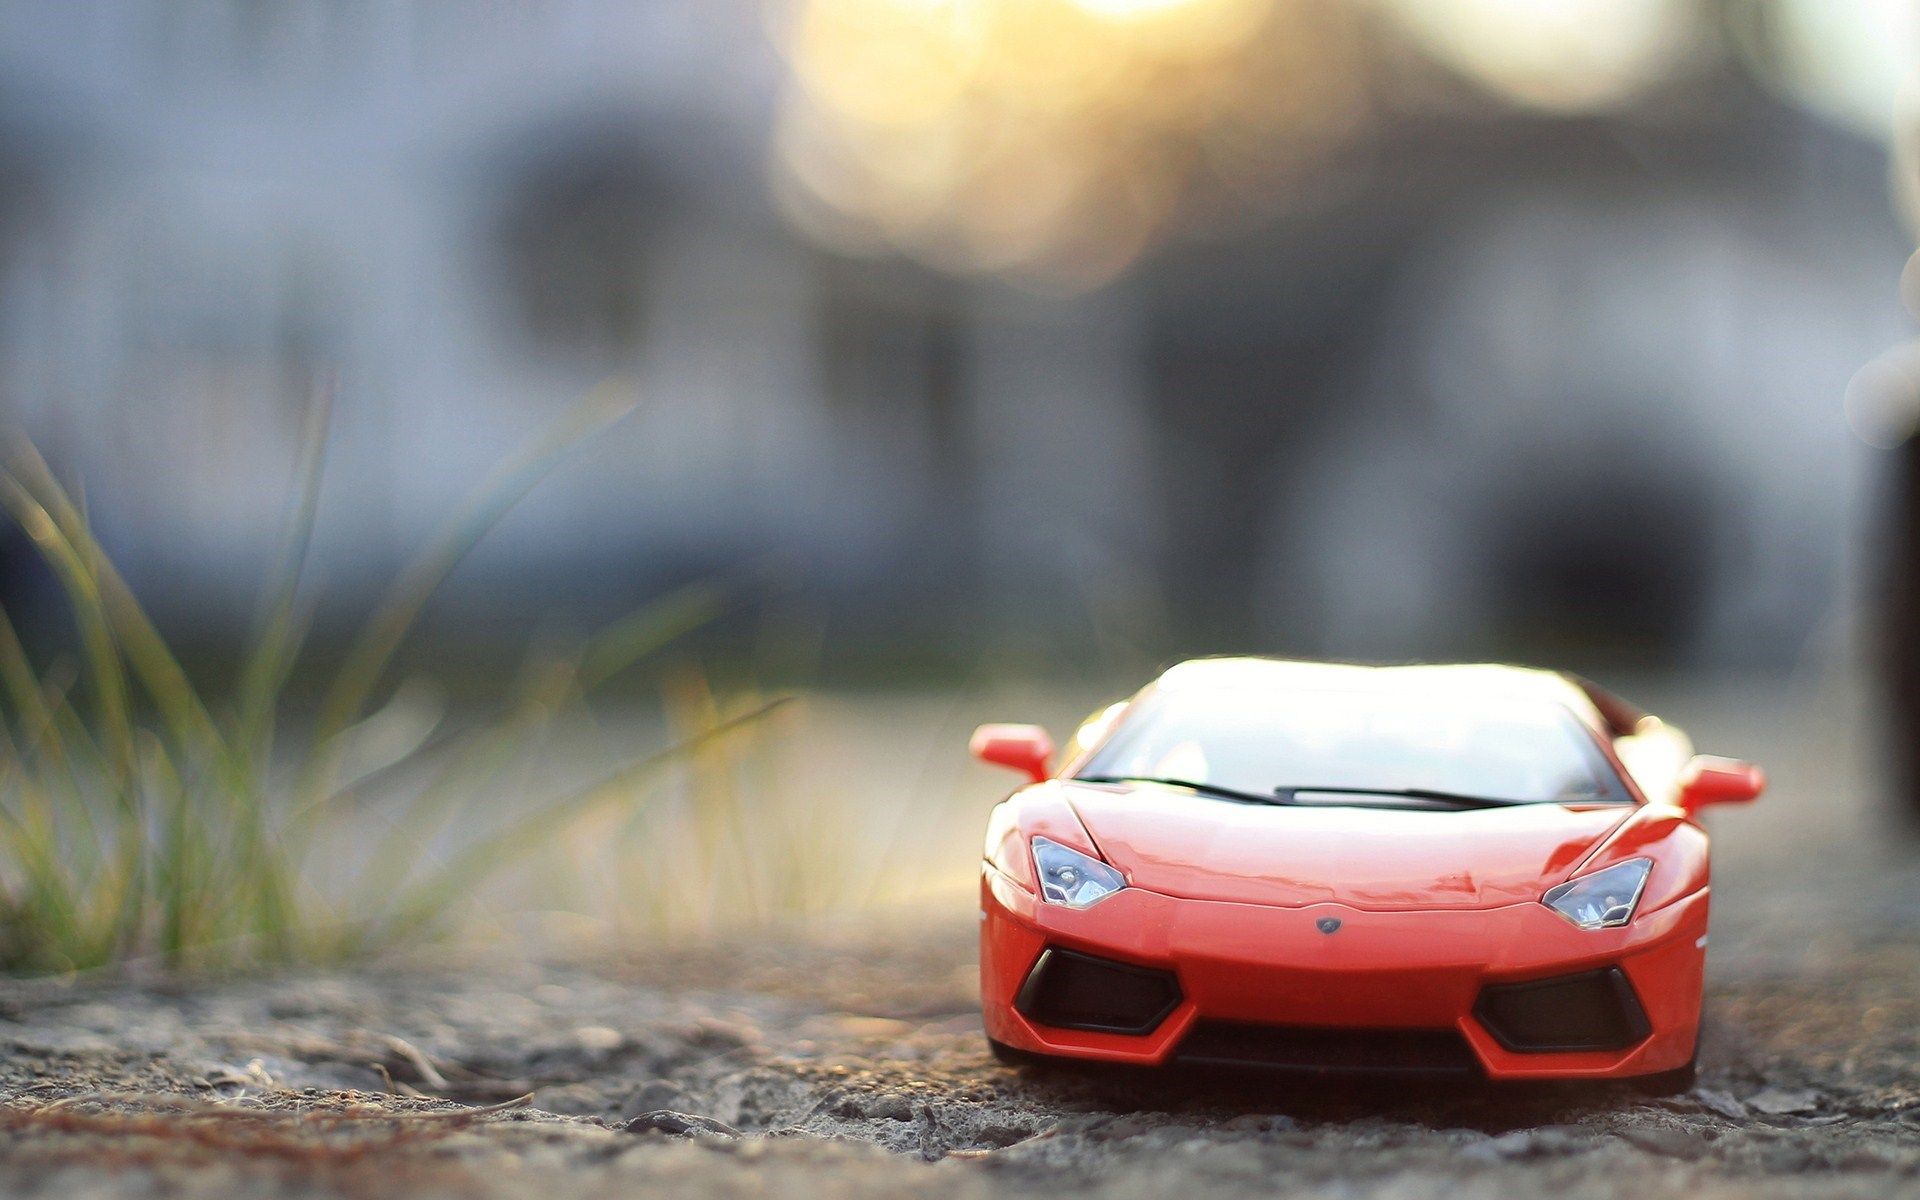 12 Outstanding HD Toy Car Wallpapers - HDWallSource.com